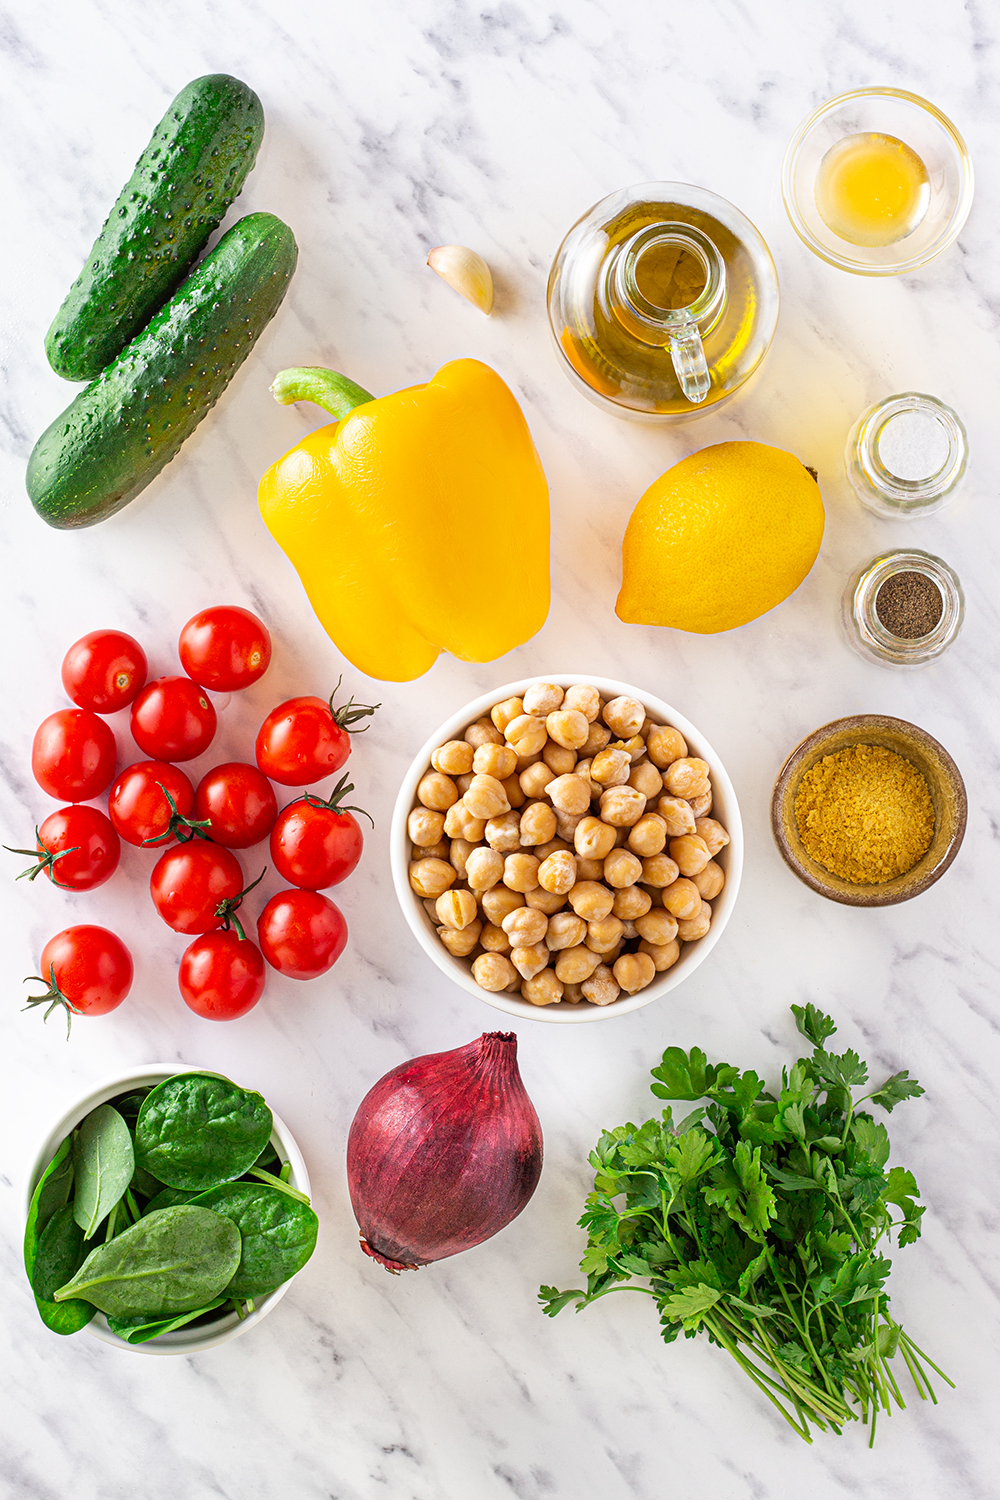 Ingredients for Chickpea Salad